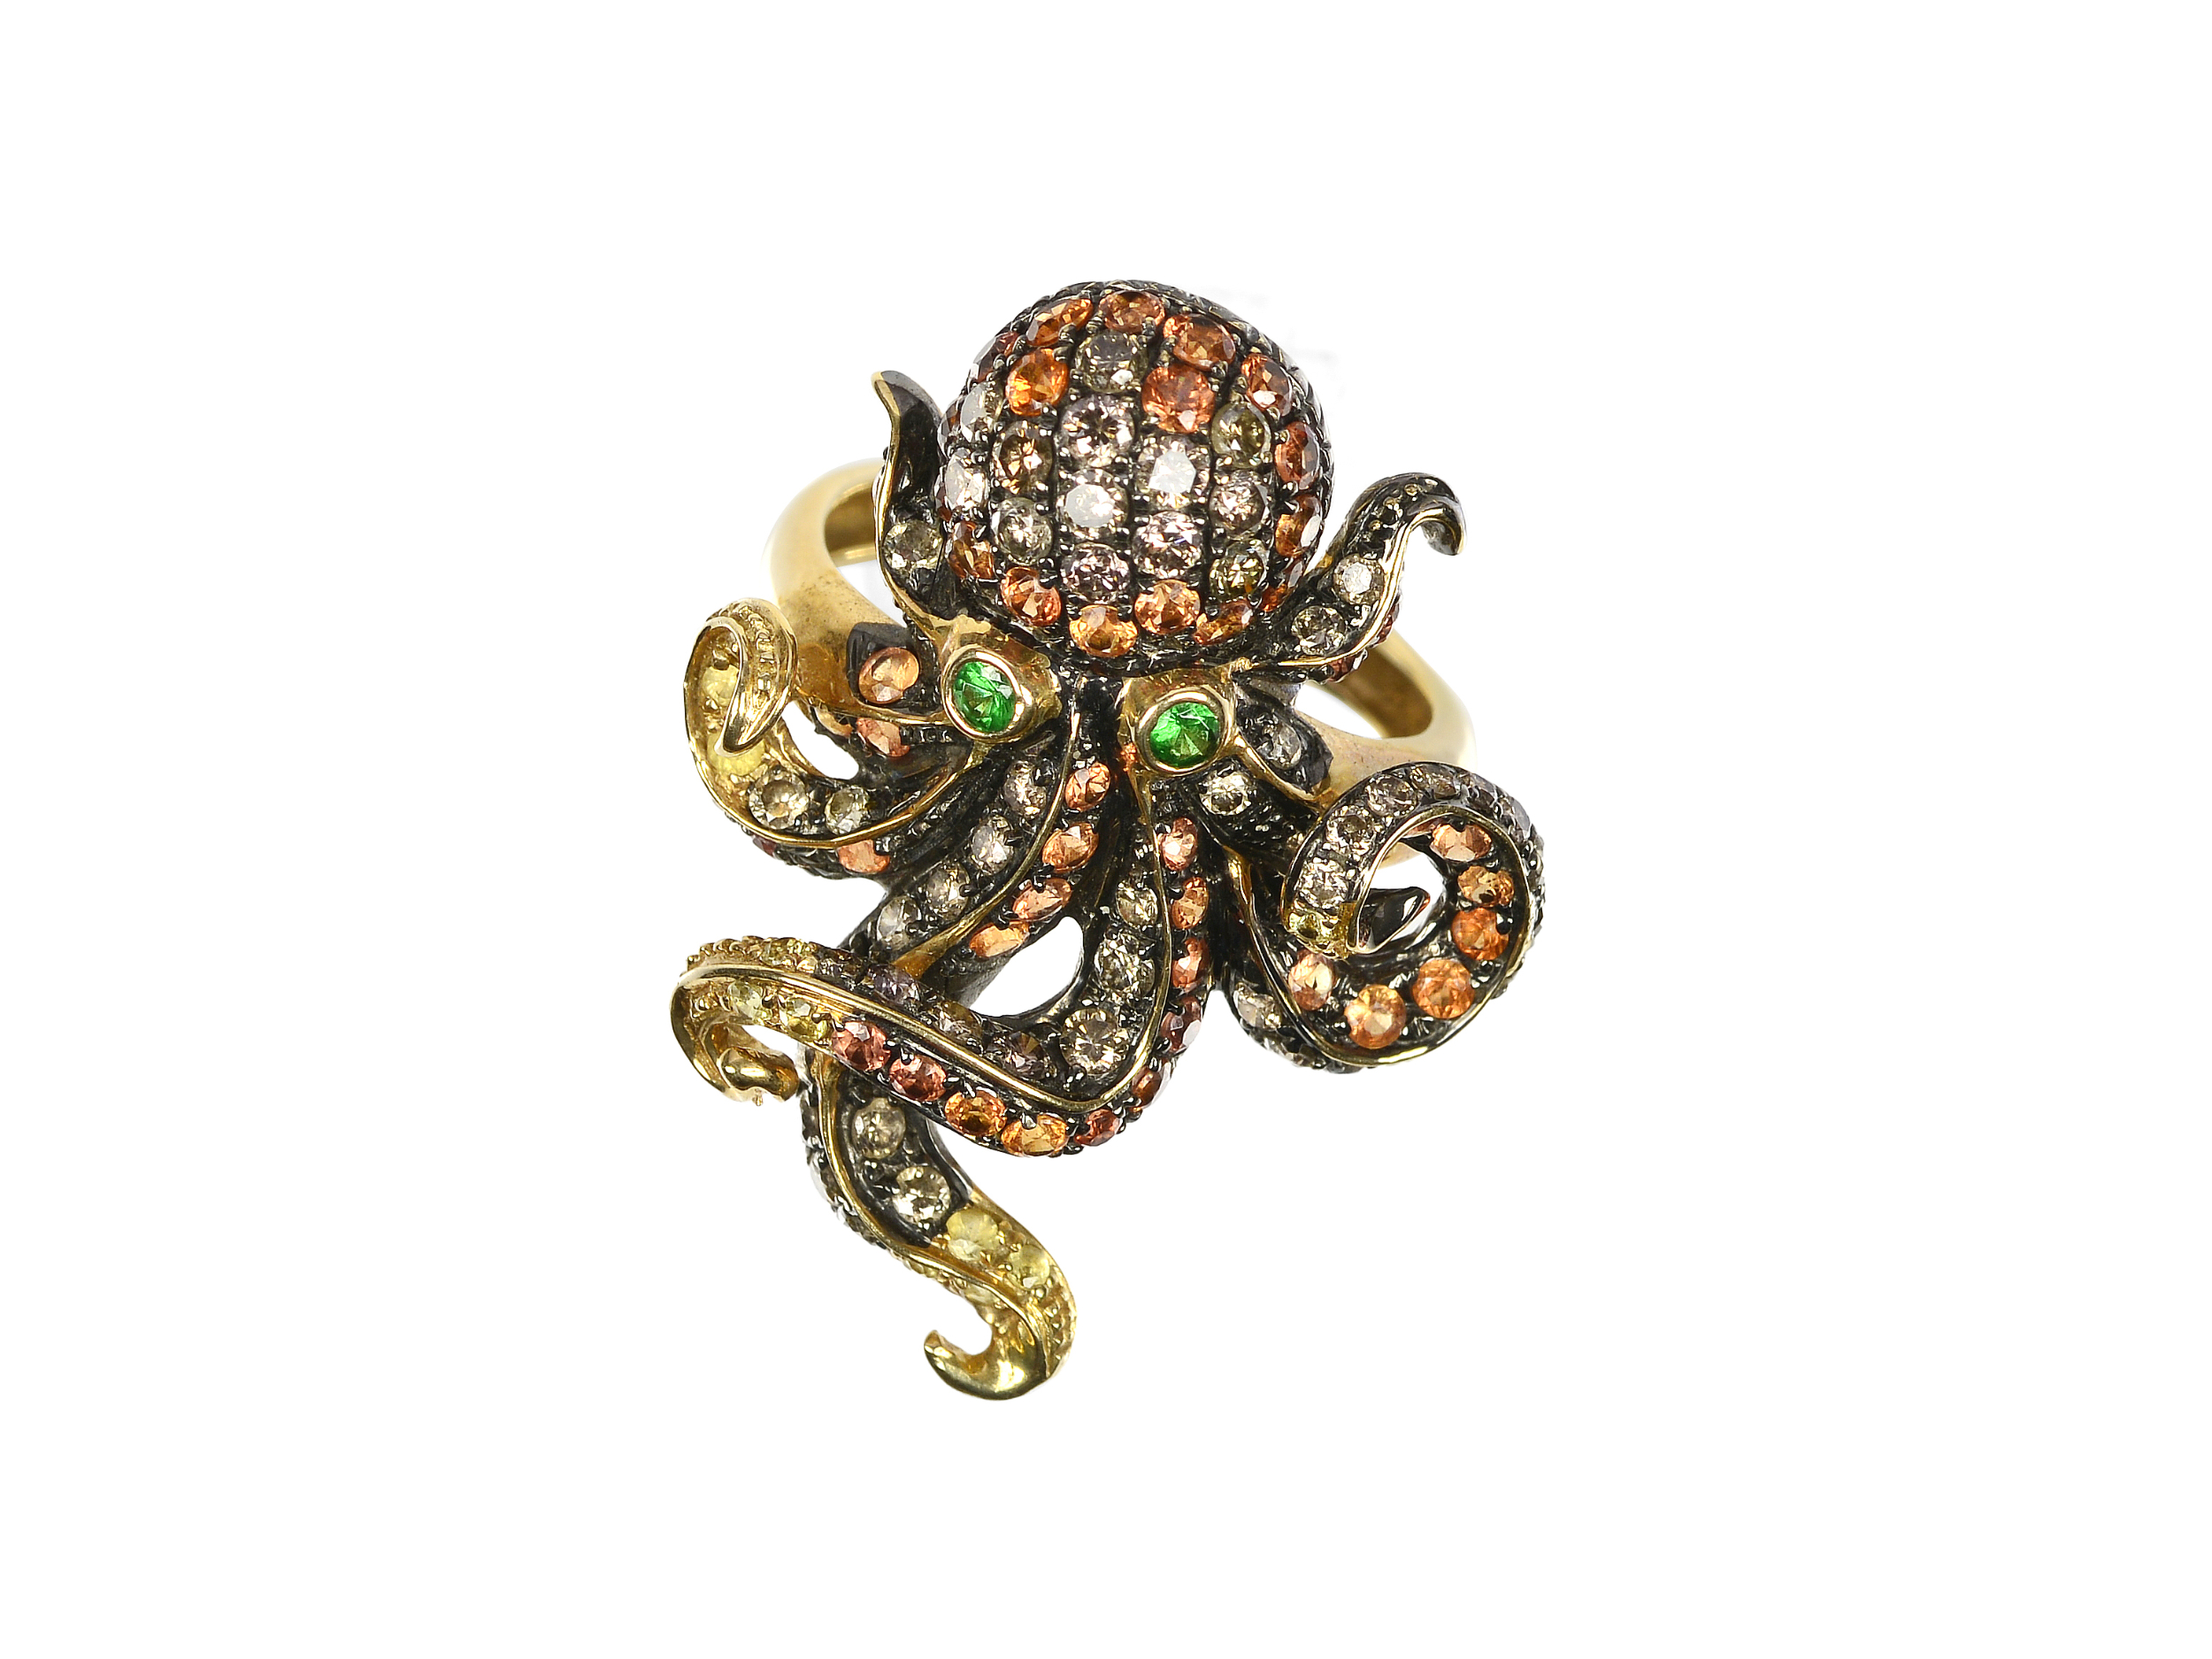 Ring with an octopus